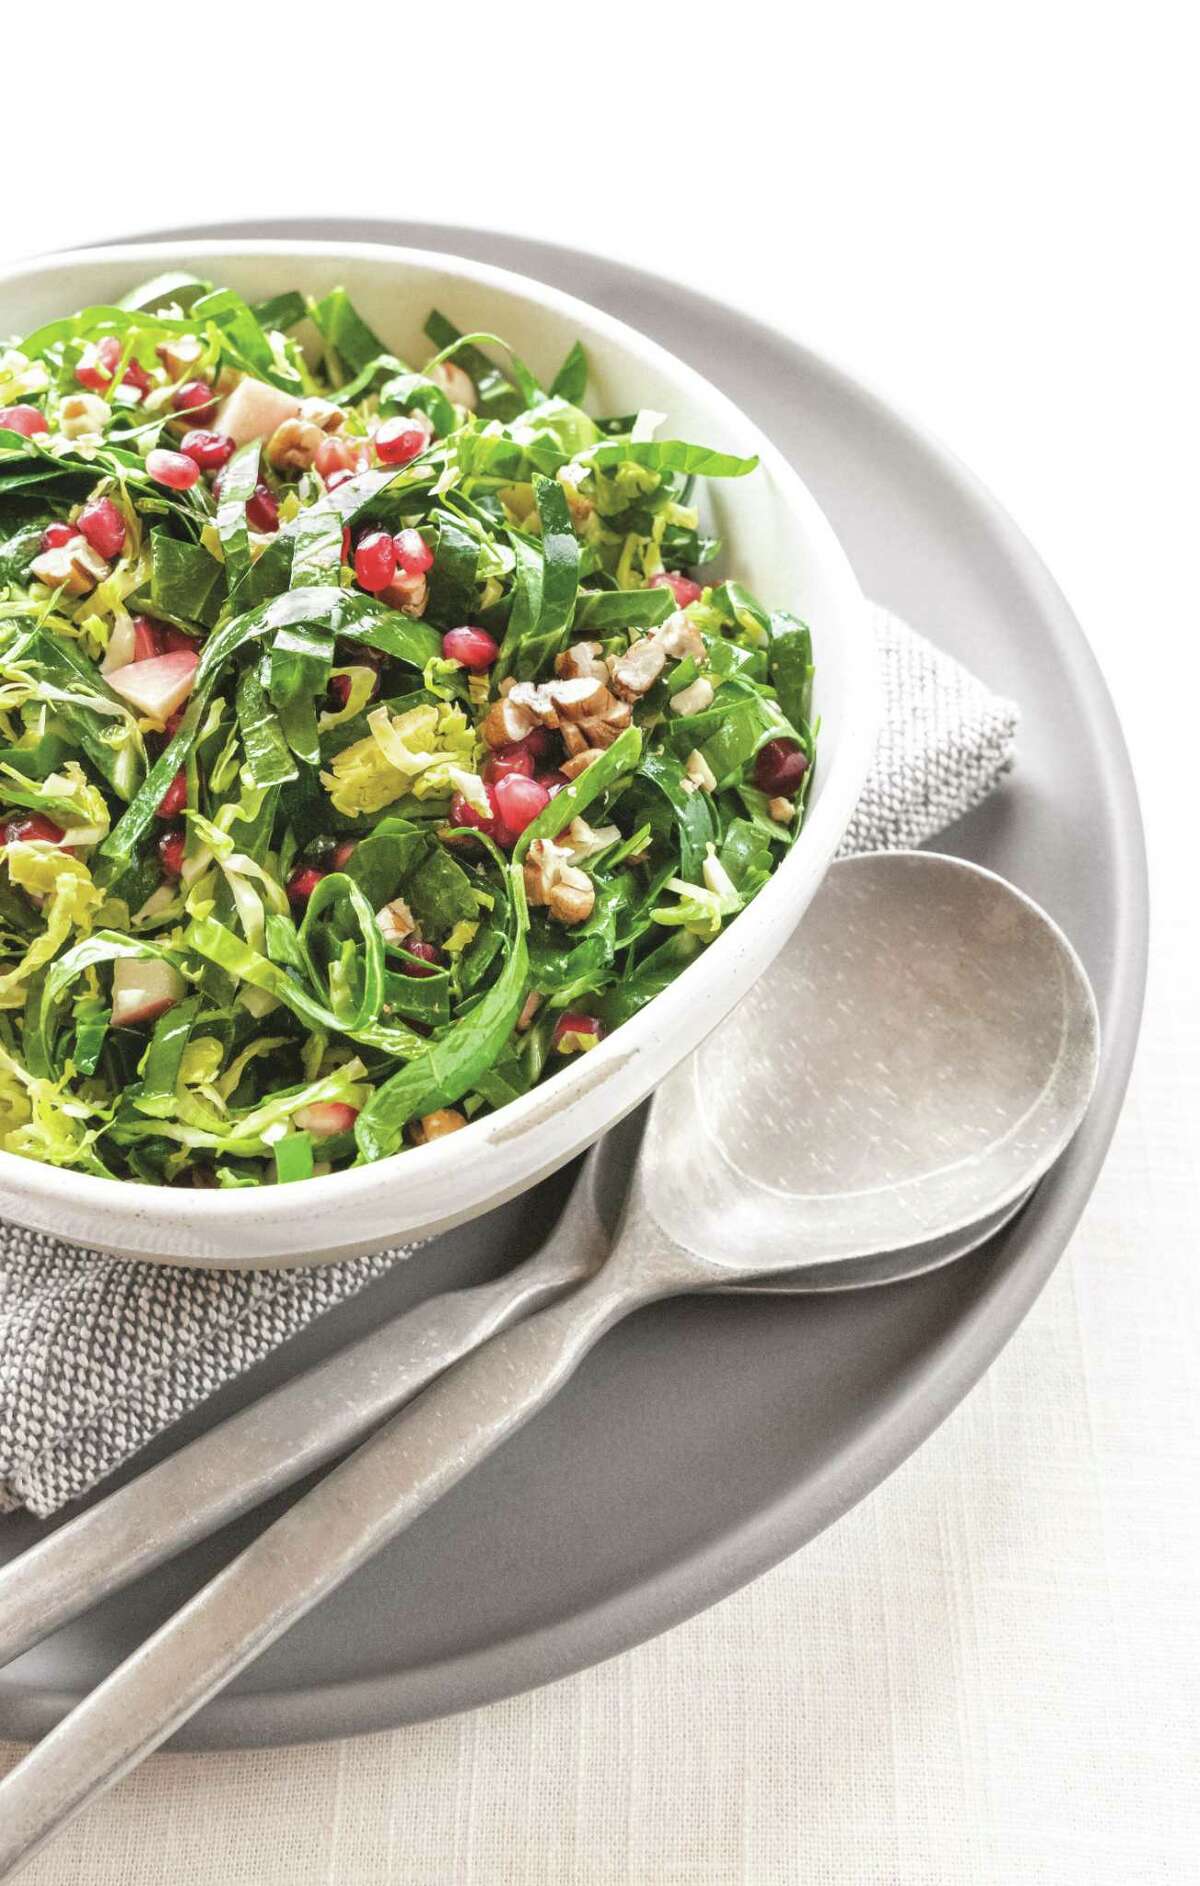 Collard Greens and Brussels Sprout Salad from "Dinner is Done" by Marcia Smart.